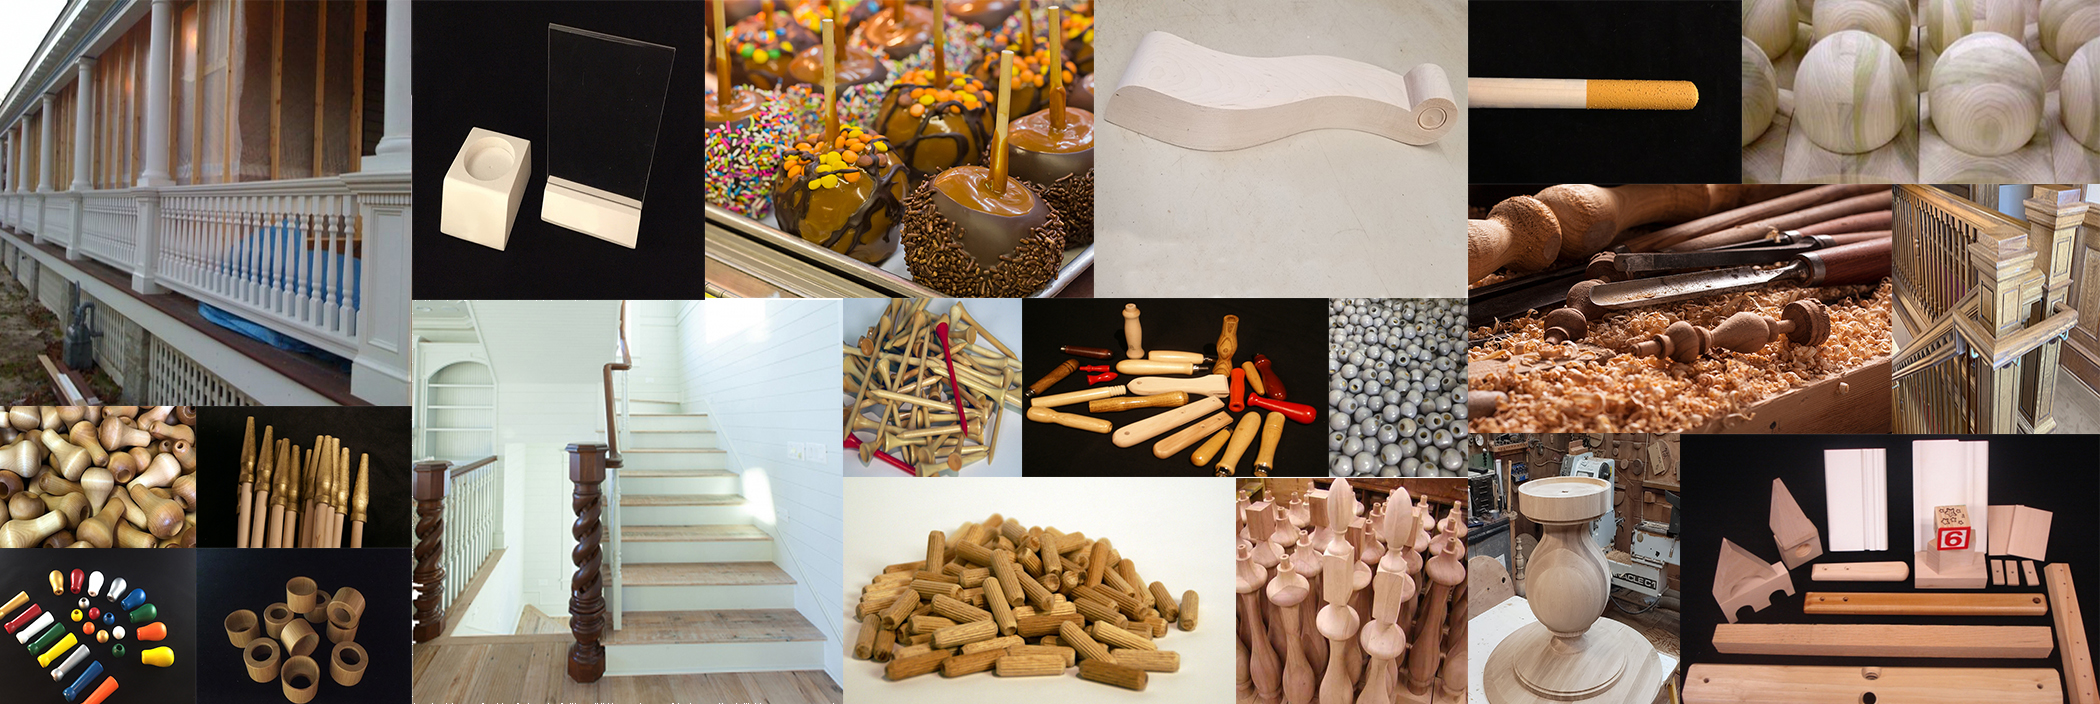 There are many important factors to keep in mind when choosing a wood products manufacturer.